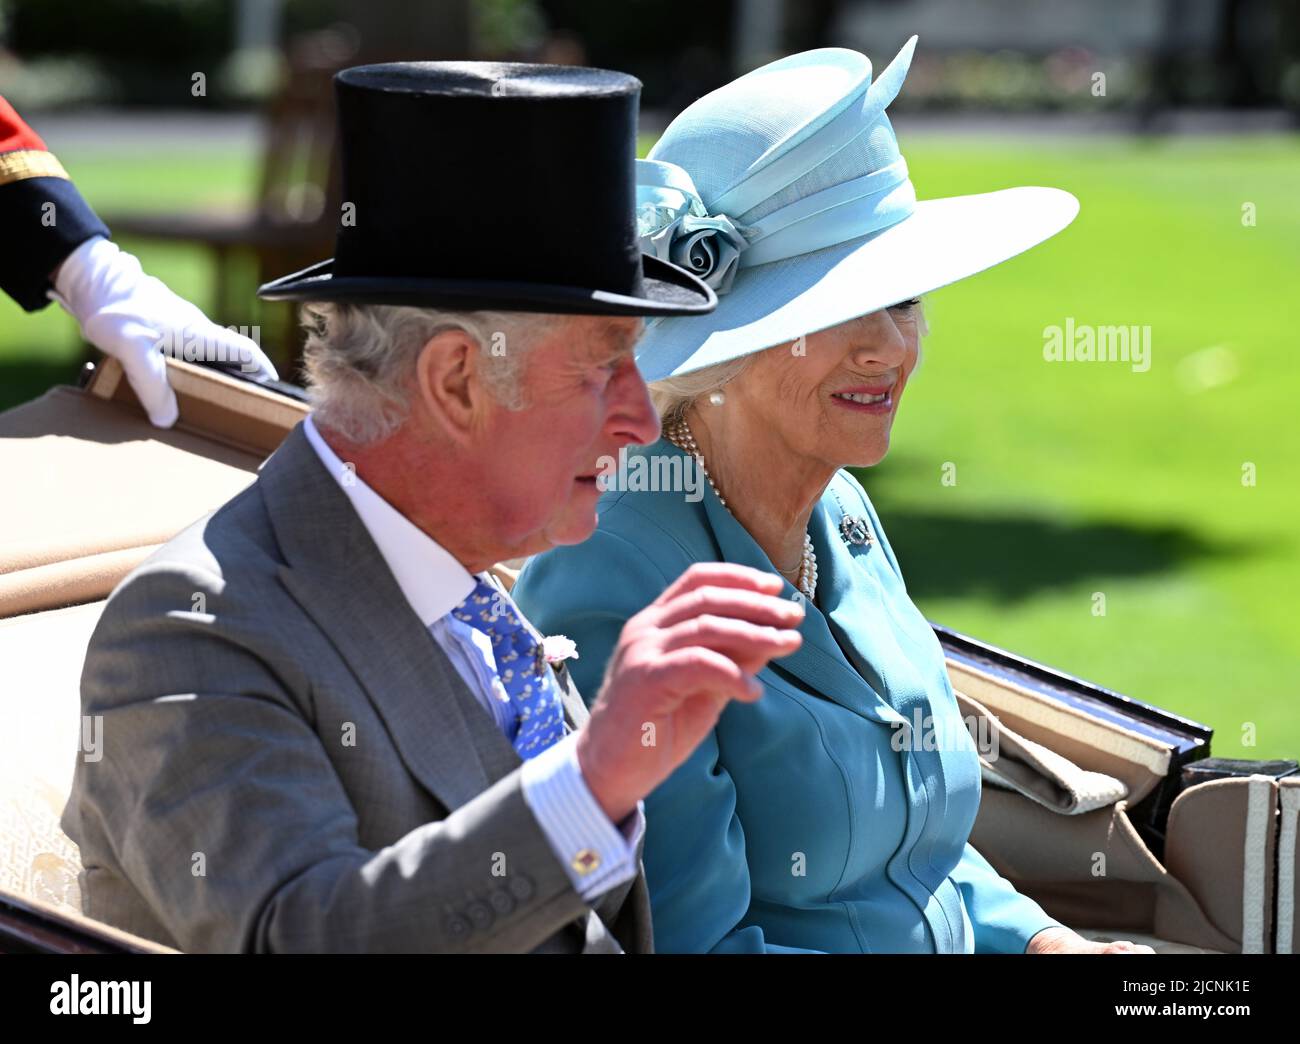 Ascot, UK. 14 June, 2022.  Prince Charles, Prince of Wales, Camilla, Duchess of Cambridge and Peter Phillips arrive in an open carriage during the first day of Royal Ascot 2022 in Ascot, England. Credit: Anwar Hussein Credit: Anwar Hussein/Alamy Live News Stock Photo